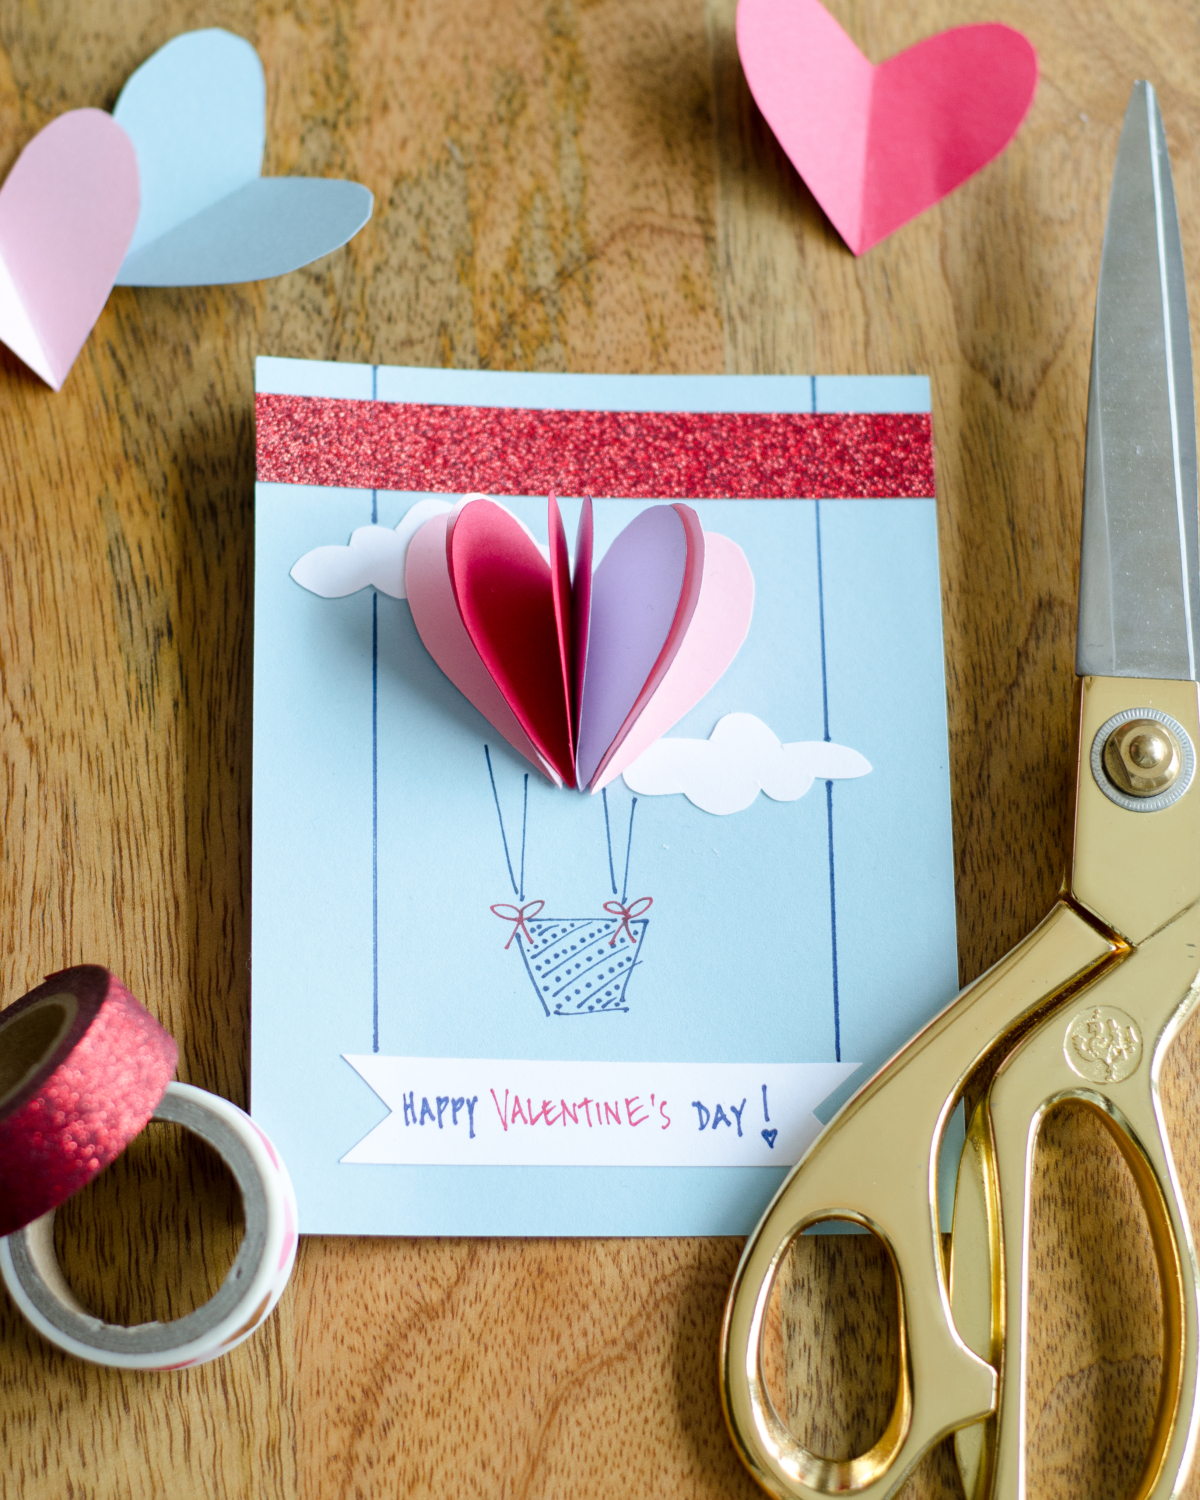 Easy DIY Valentines Cards Using Simple Folded Paper Hearts